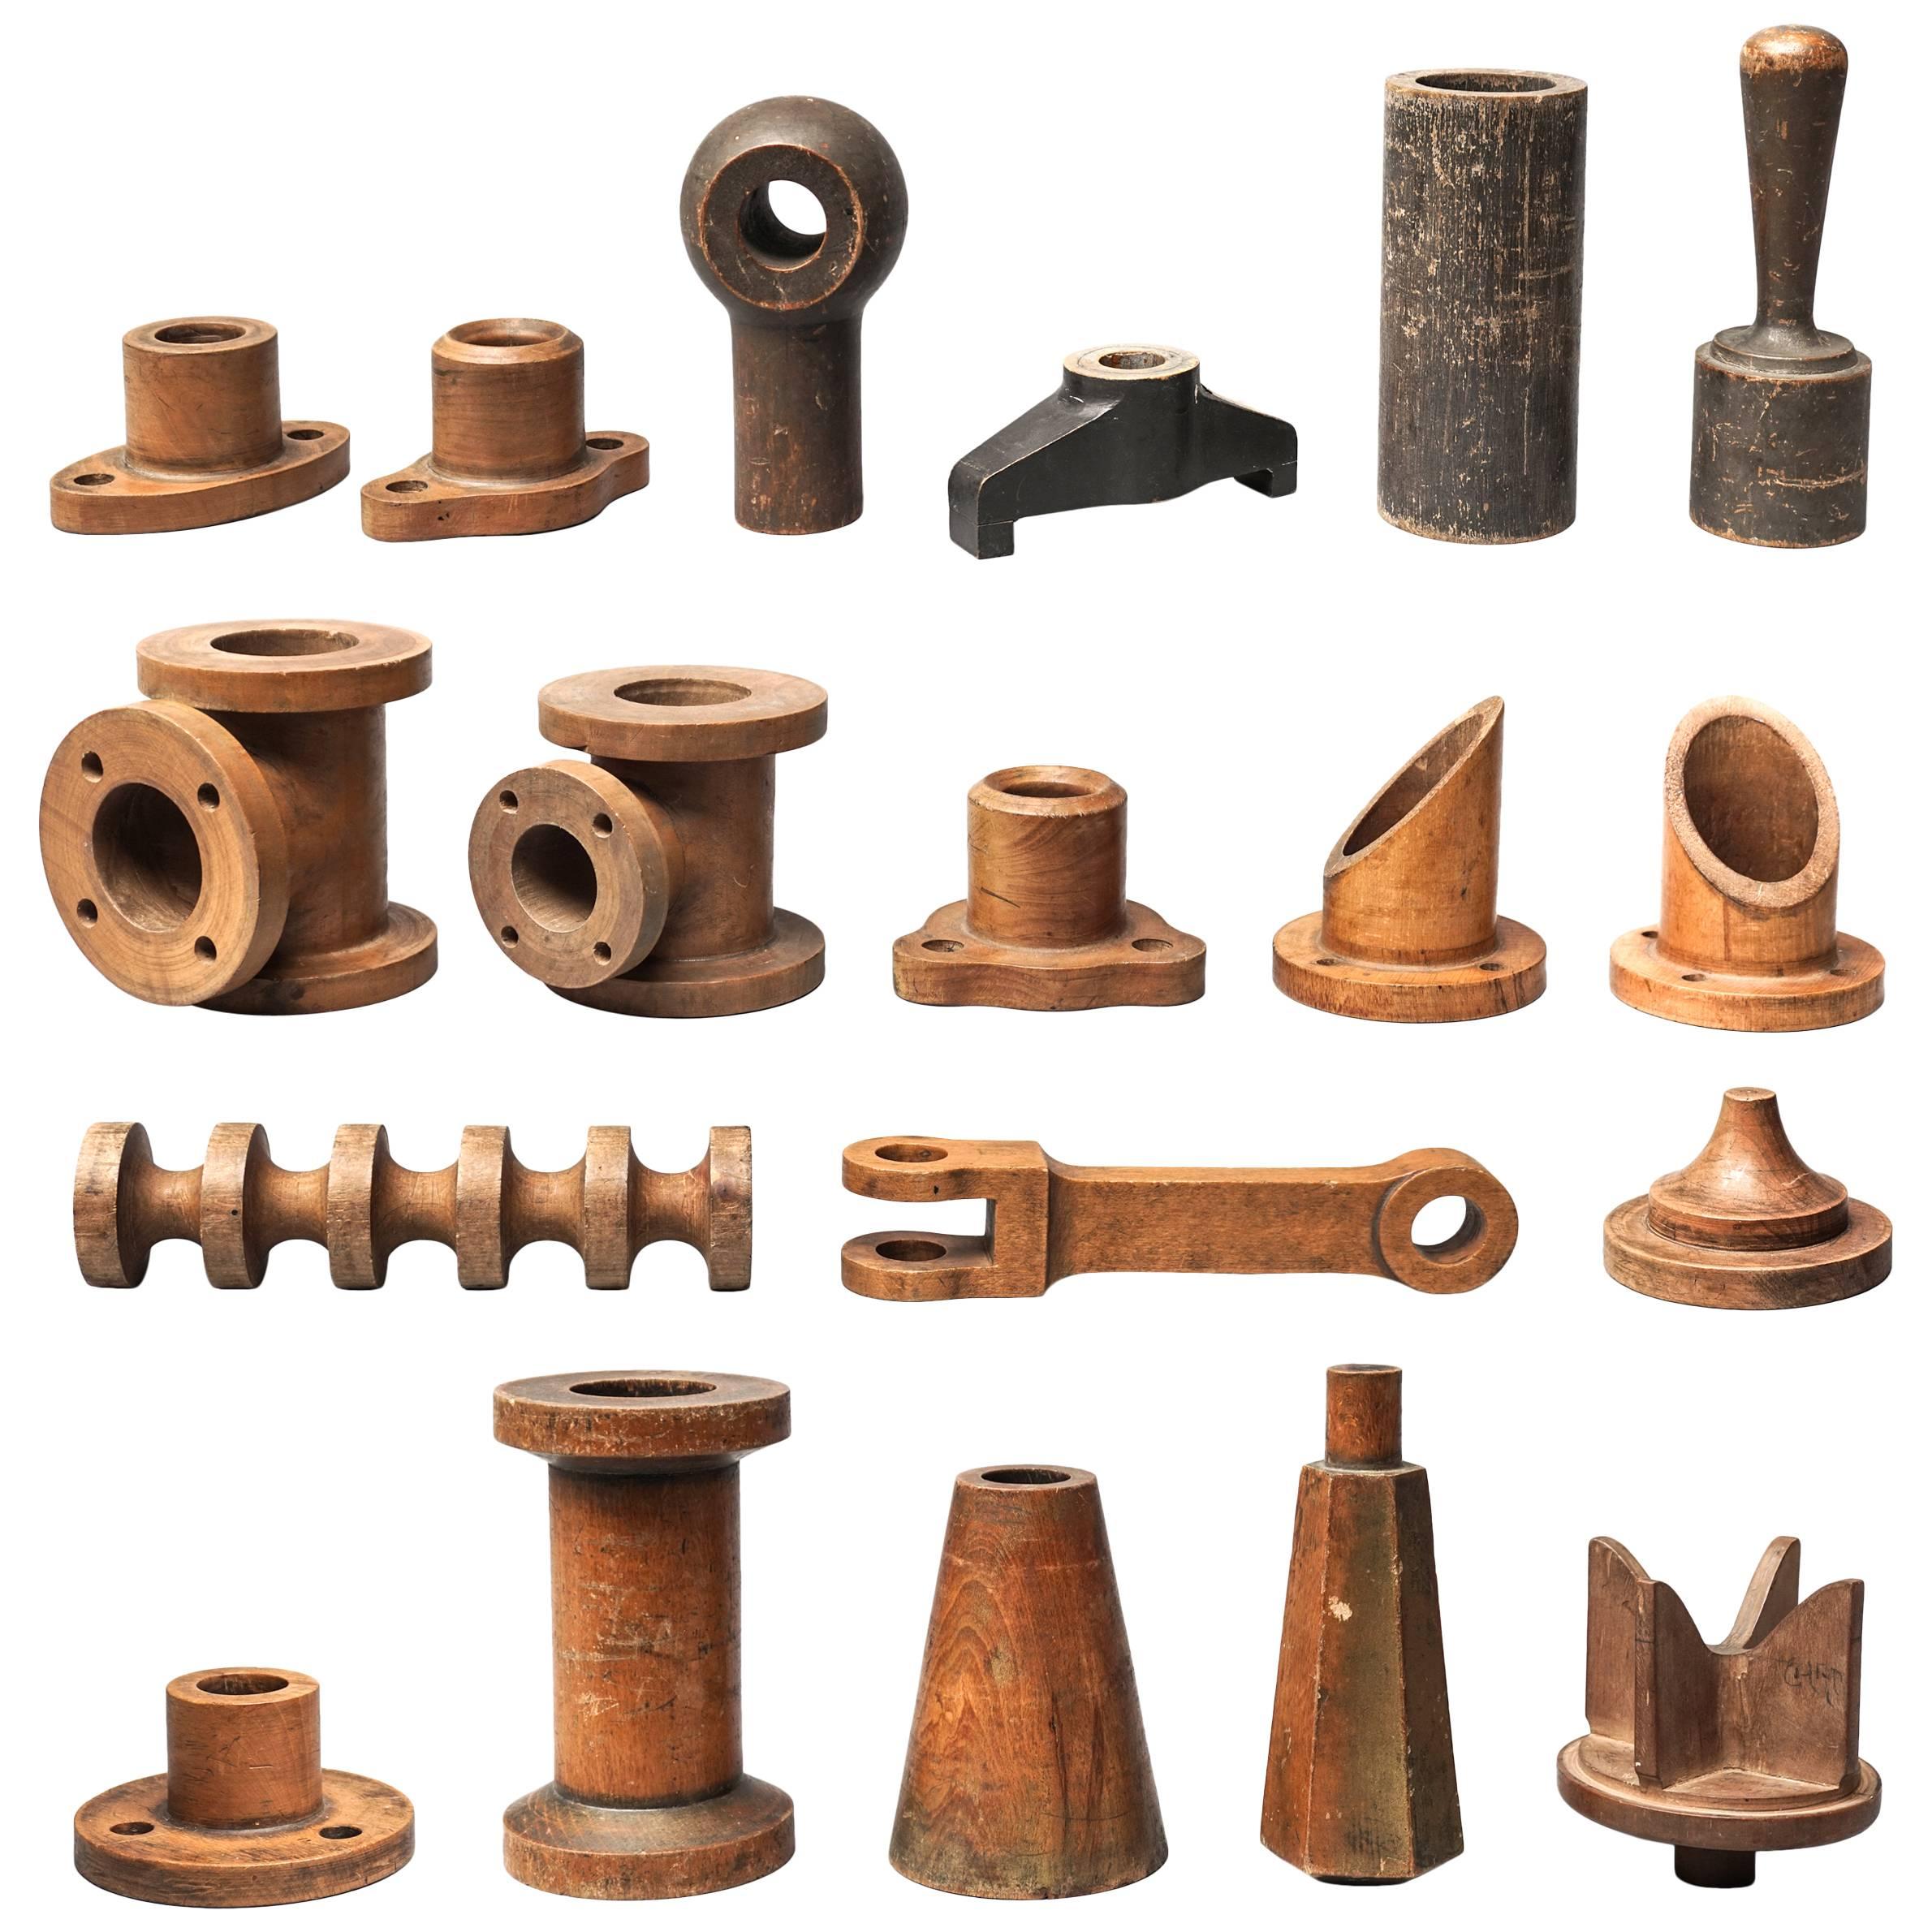 19th Century Industrial Wooden Foundry Molds or Moulds